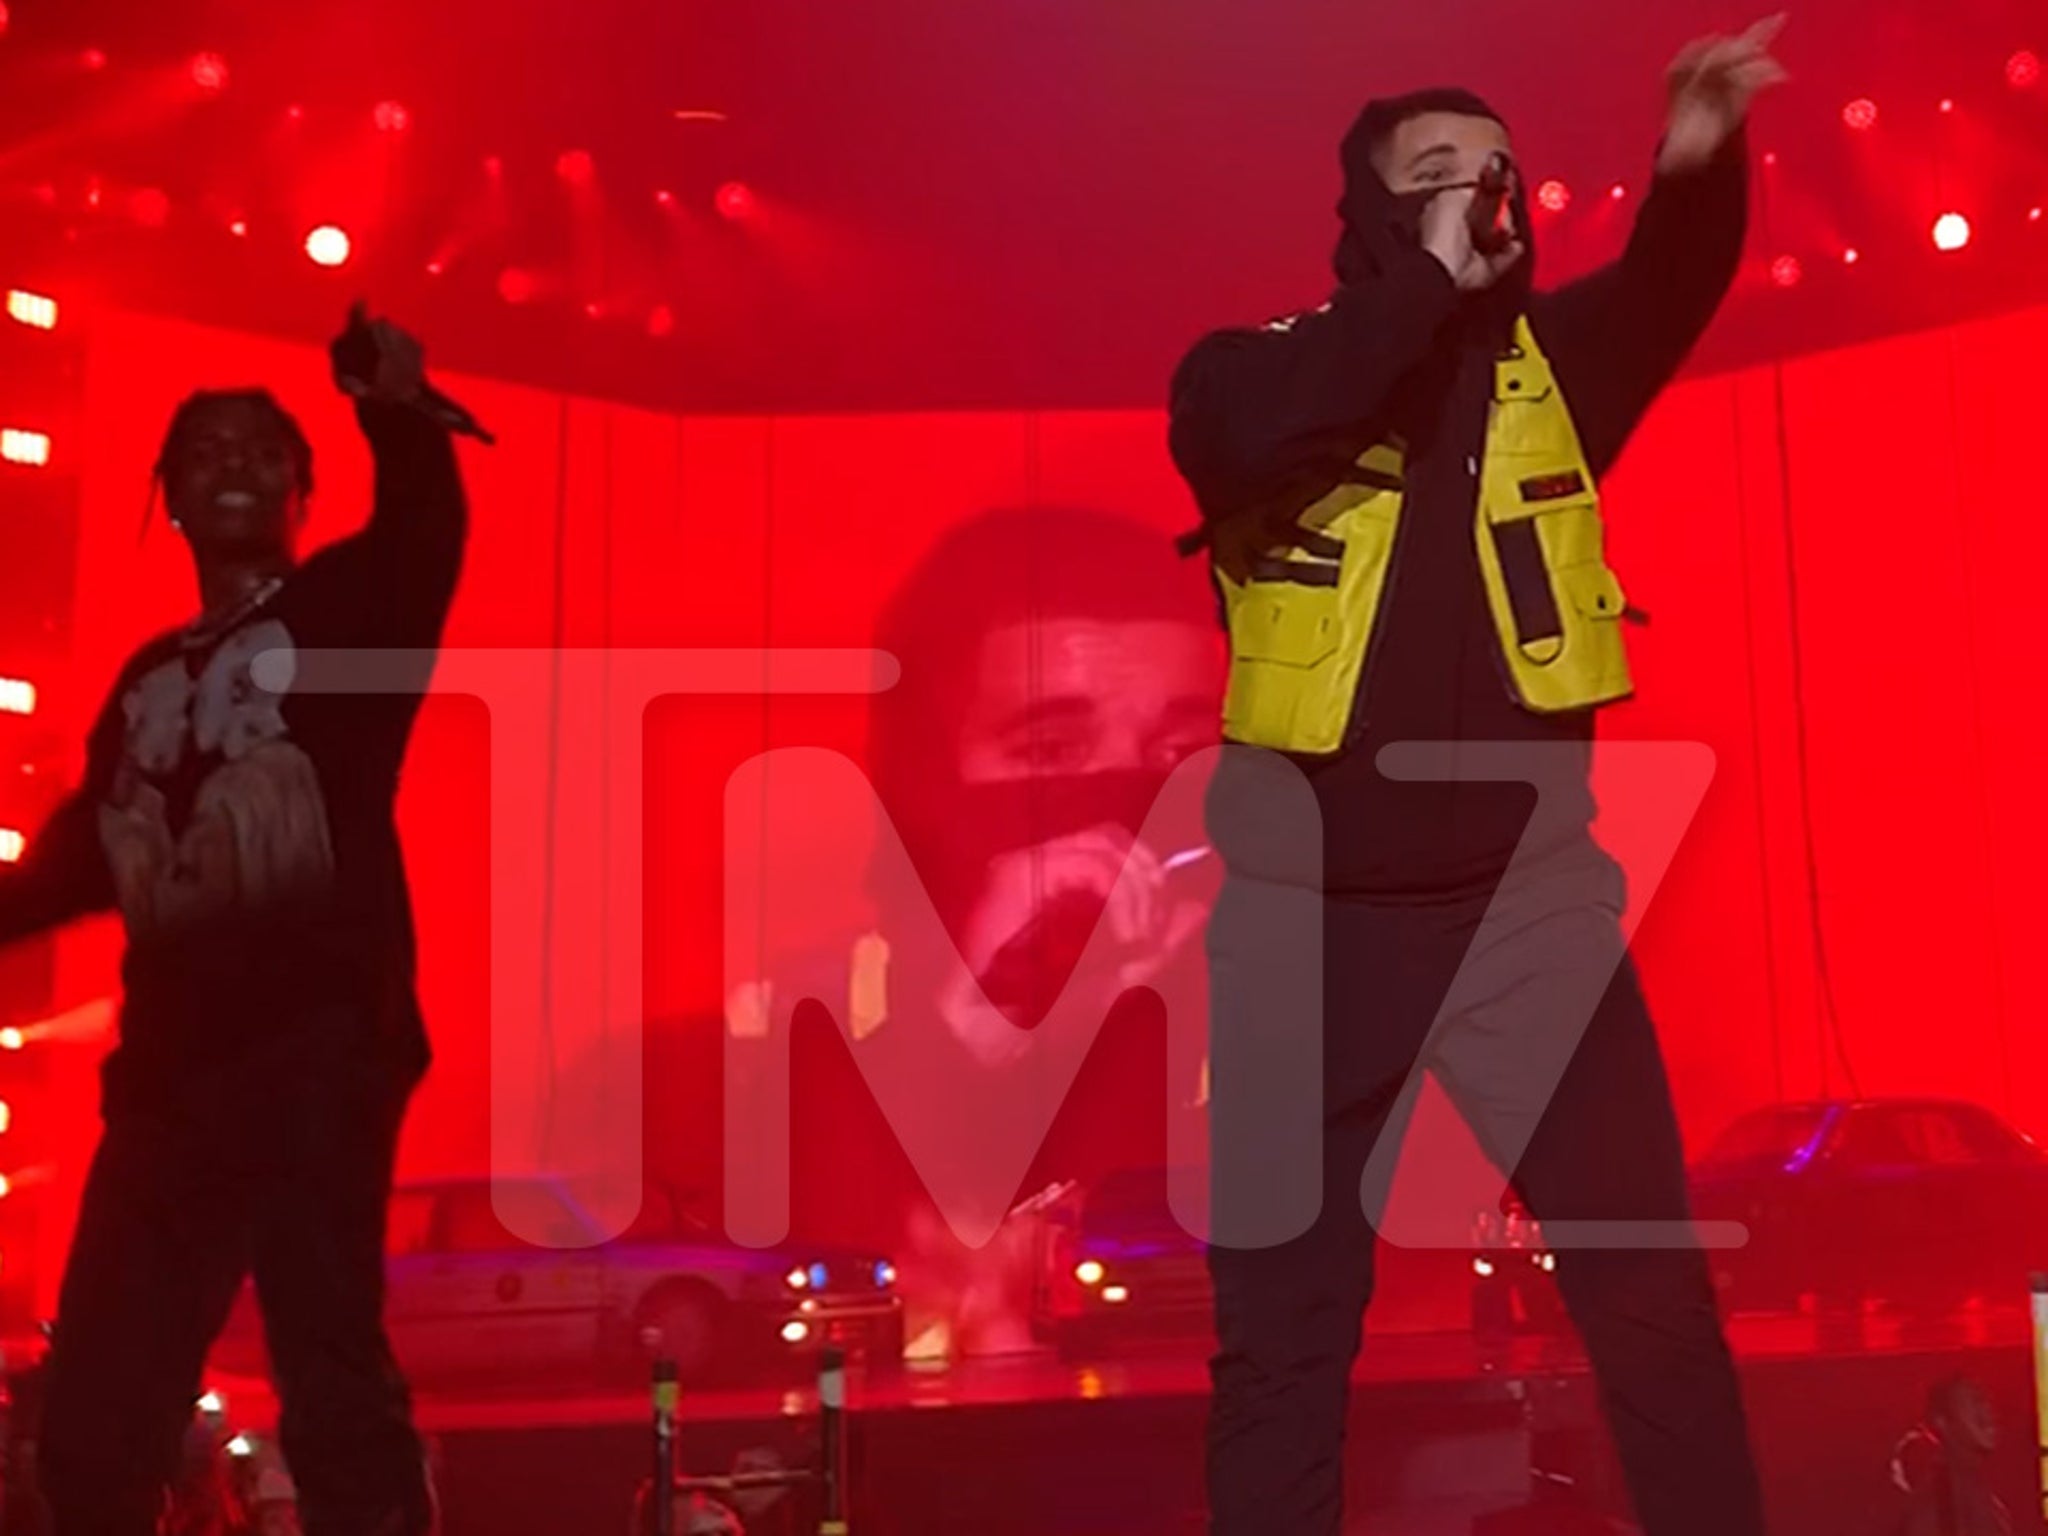 Drake joins ASAP Rocky for “Nonstop” and “Sicko Mode” in LA: Watch